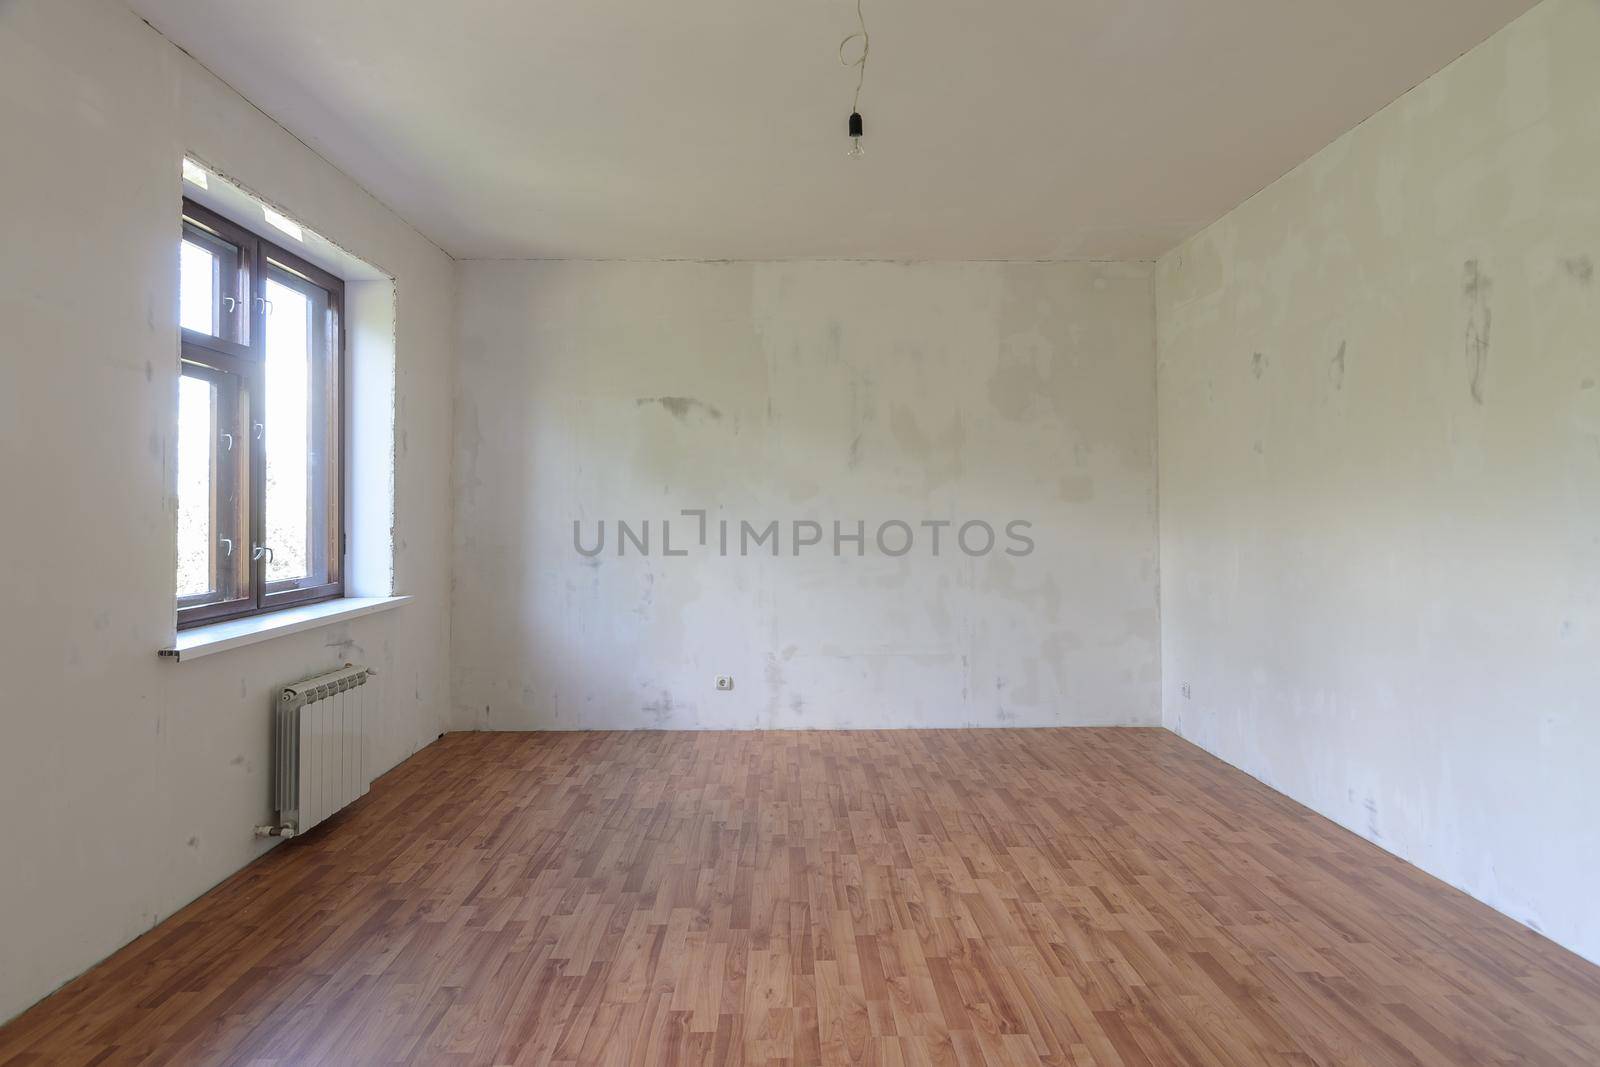 Interior of a small empty room with one window during renovation a